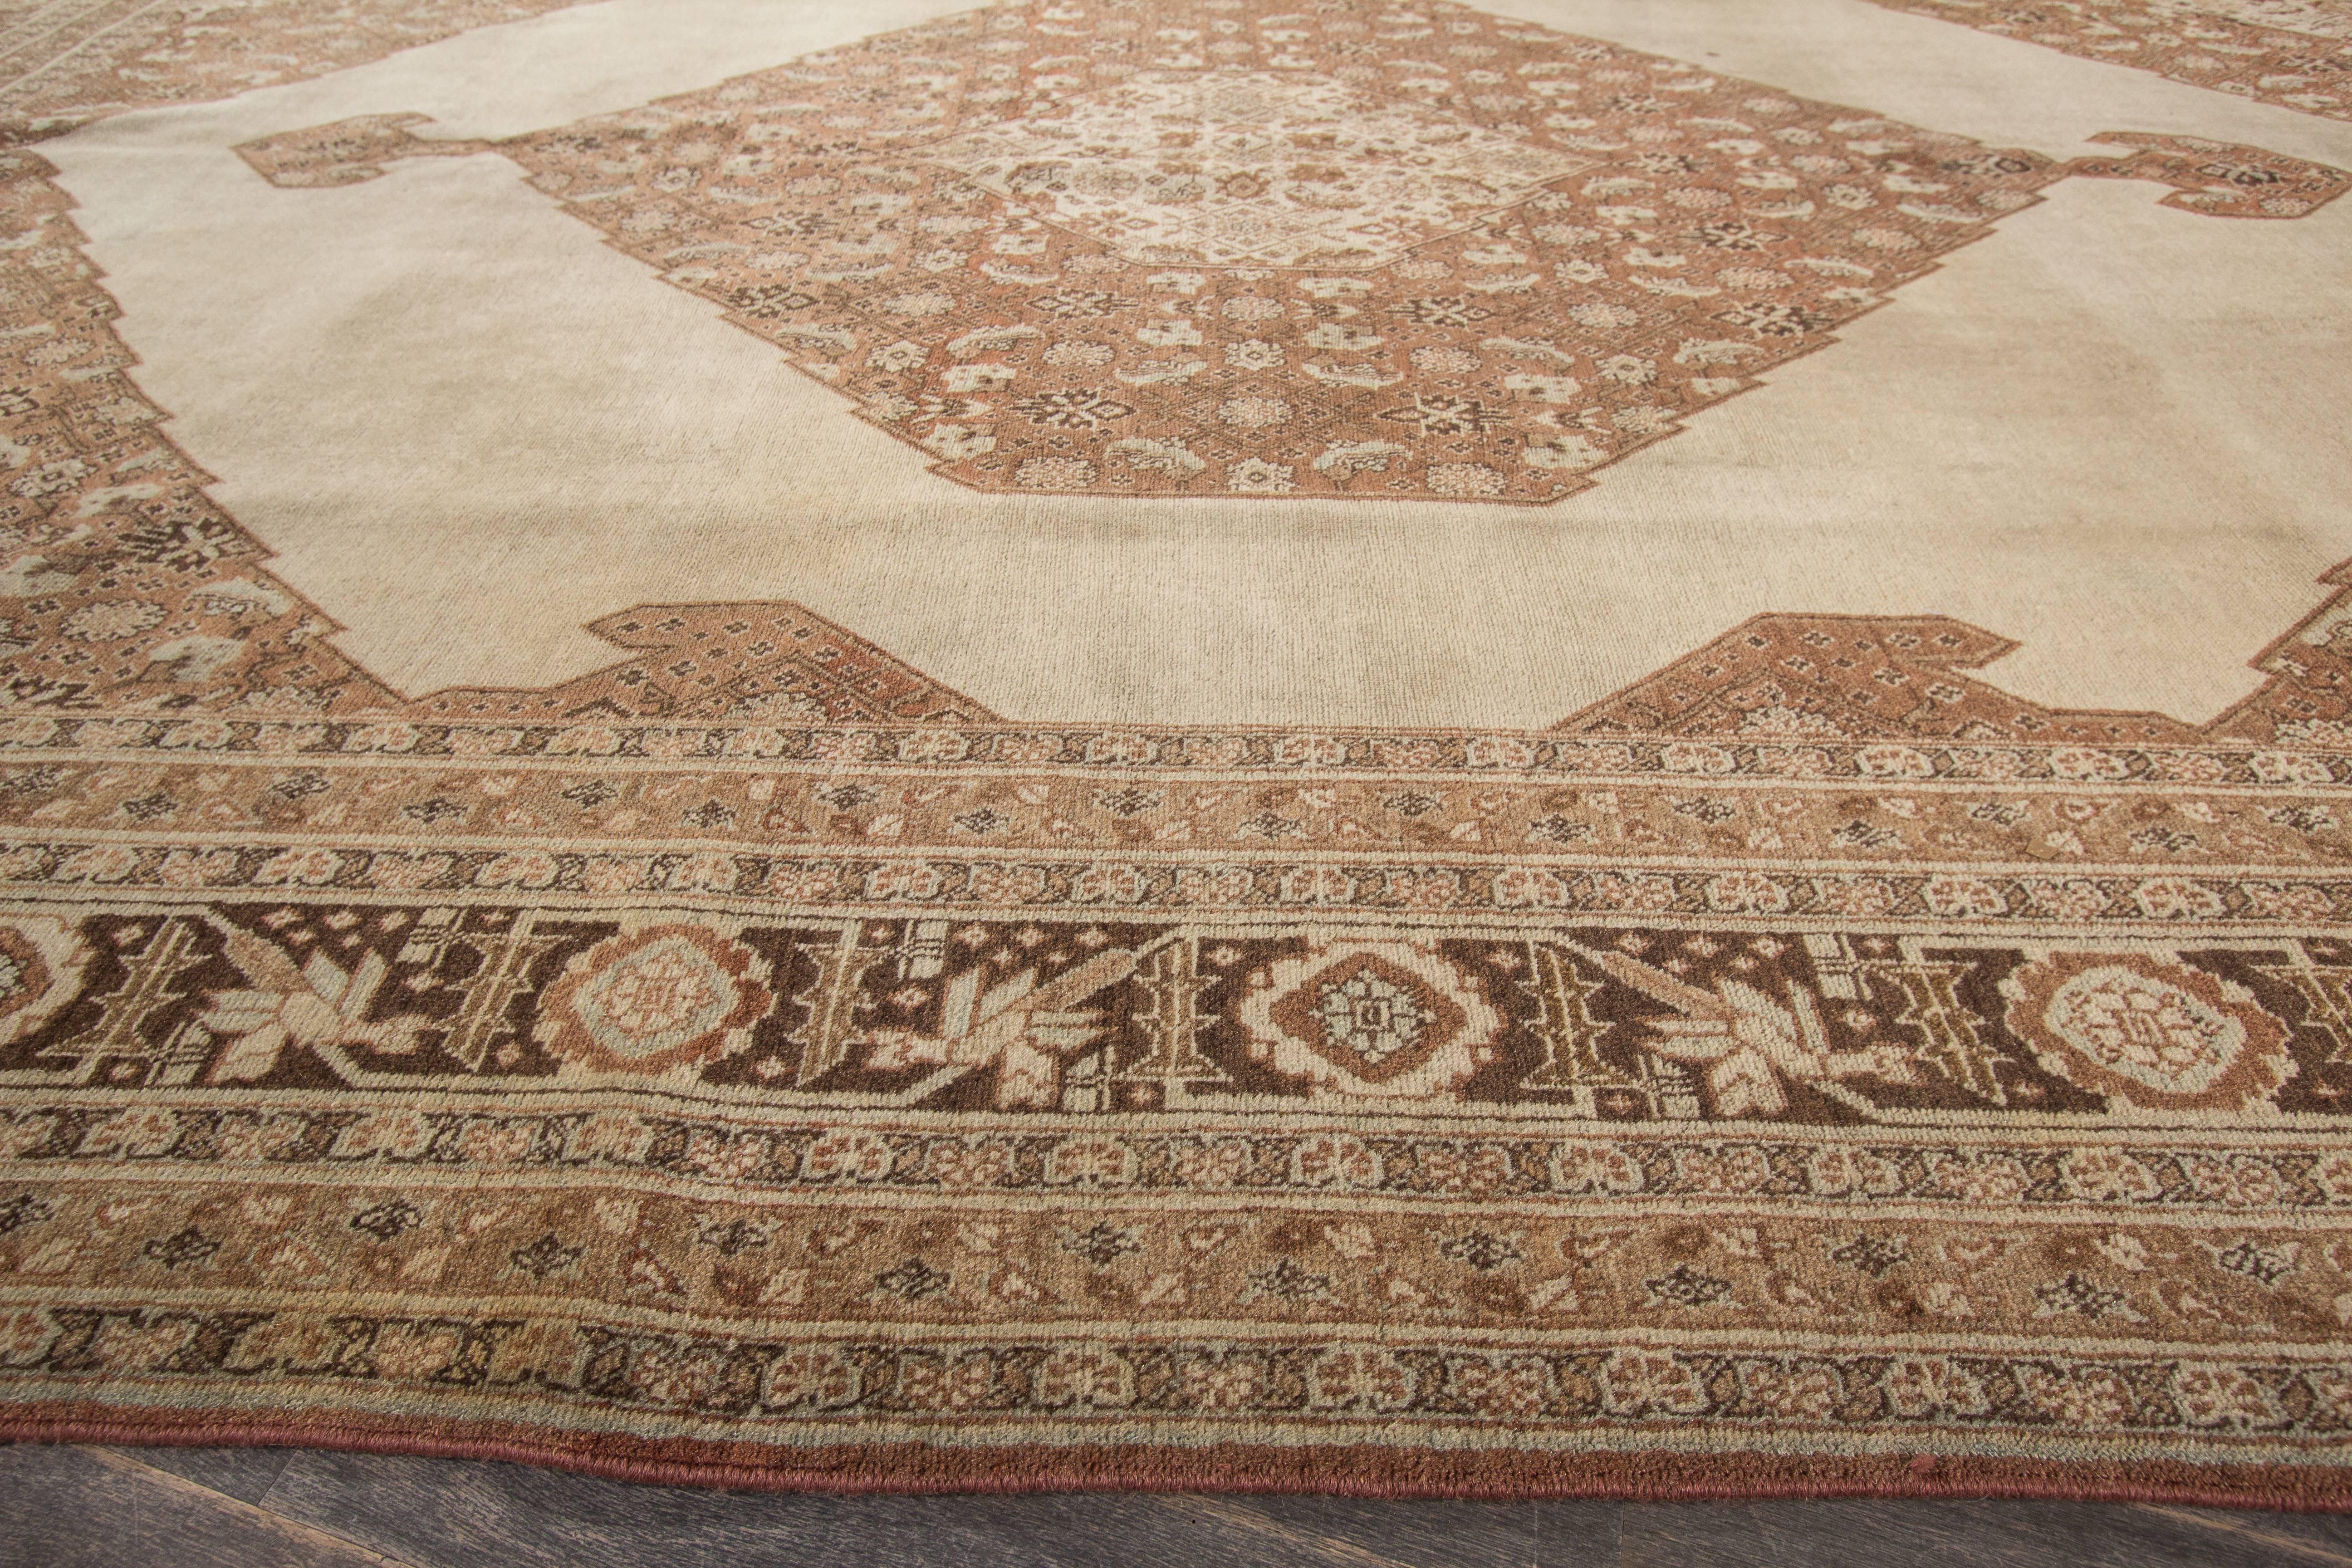 Antique Persian Tabriz Rug In Excellent Condition For Sale In Norwalk, CT